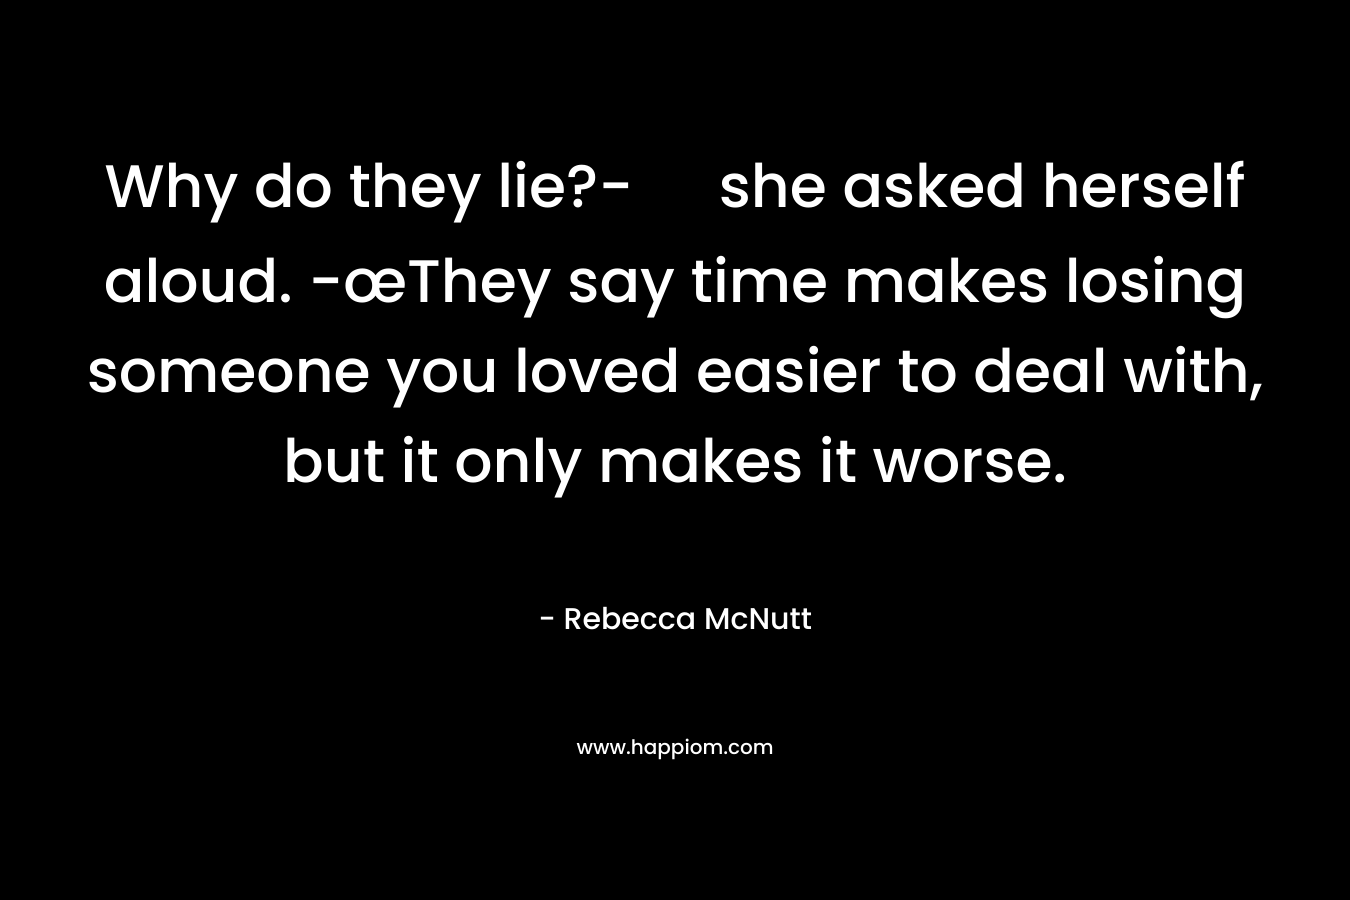 Why do they lie?- she asked herself aloud. -œThey say time makes losing someone you loved easier to deal with, but it only makes it worse.